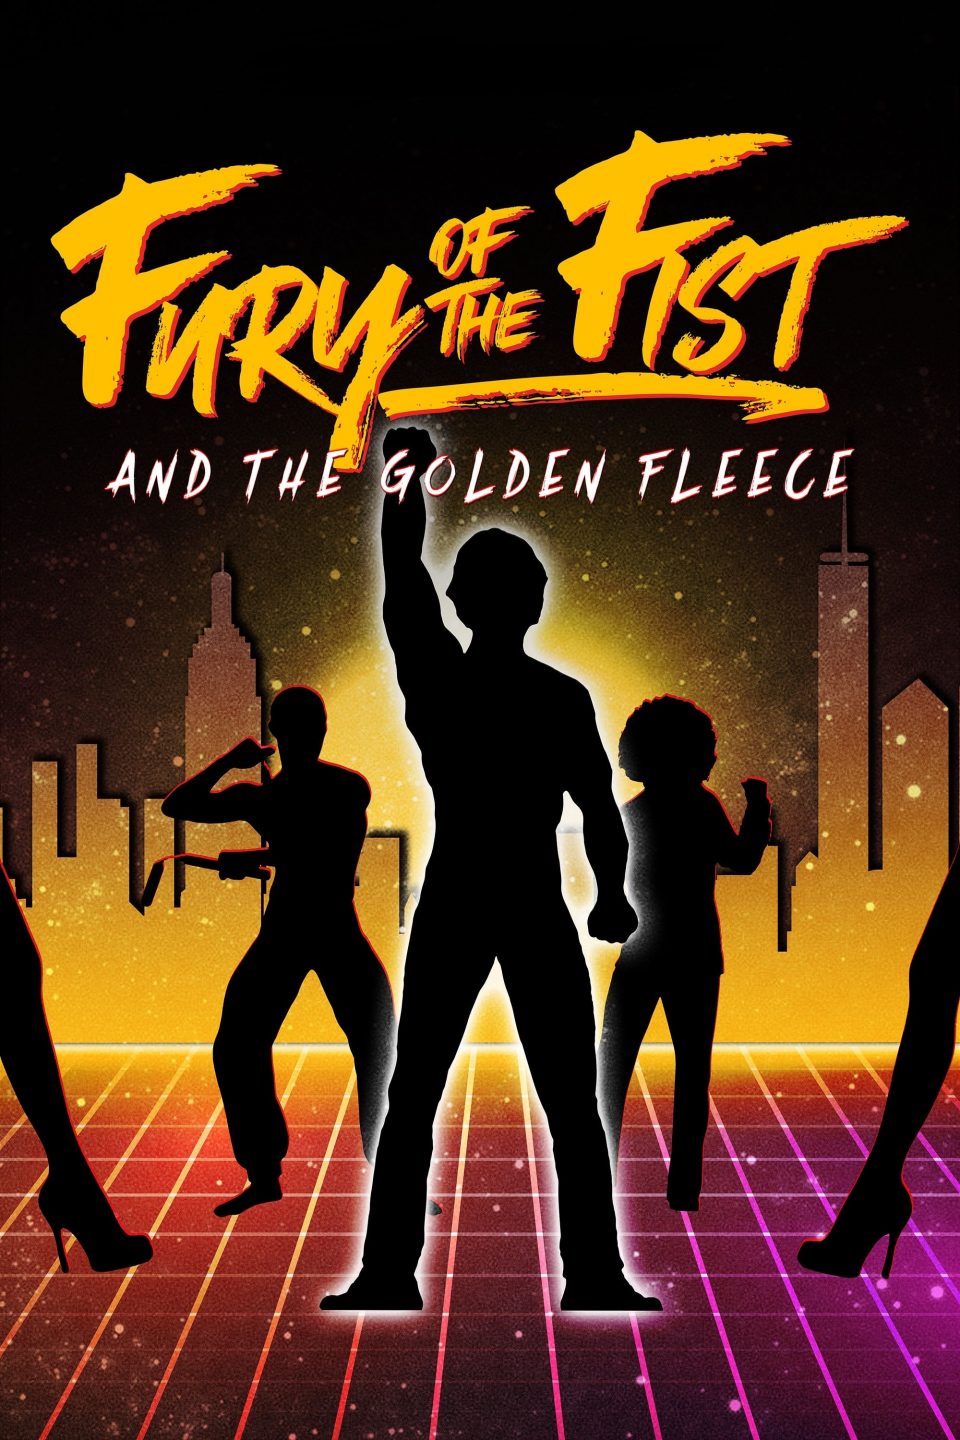 Poster for the movie "Fury of the Fist and the Golden Fleece"